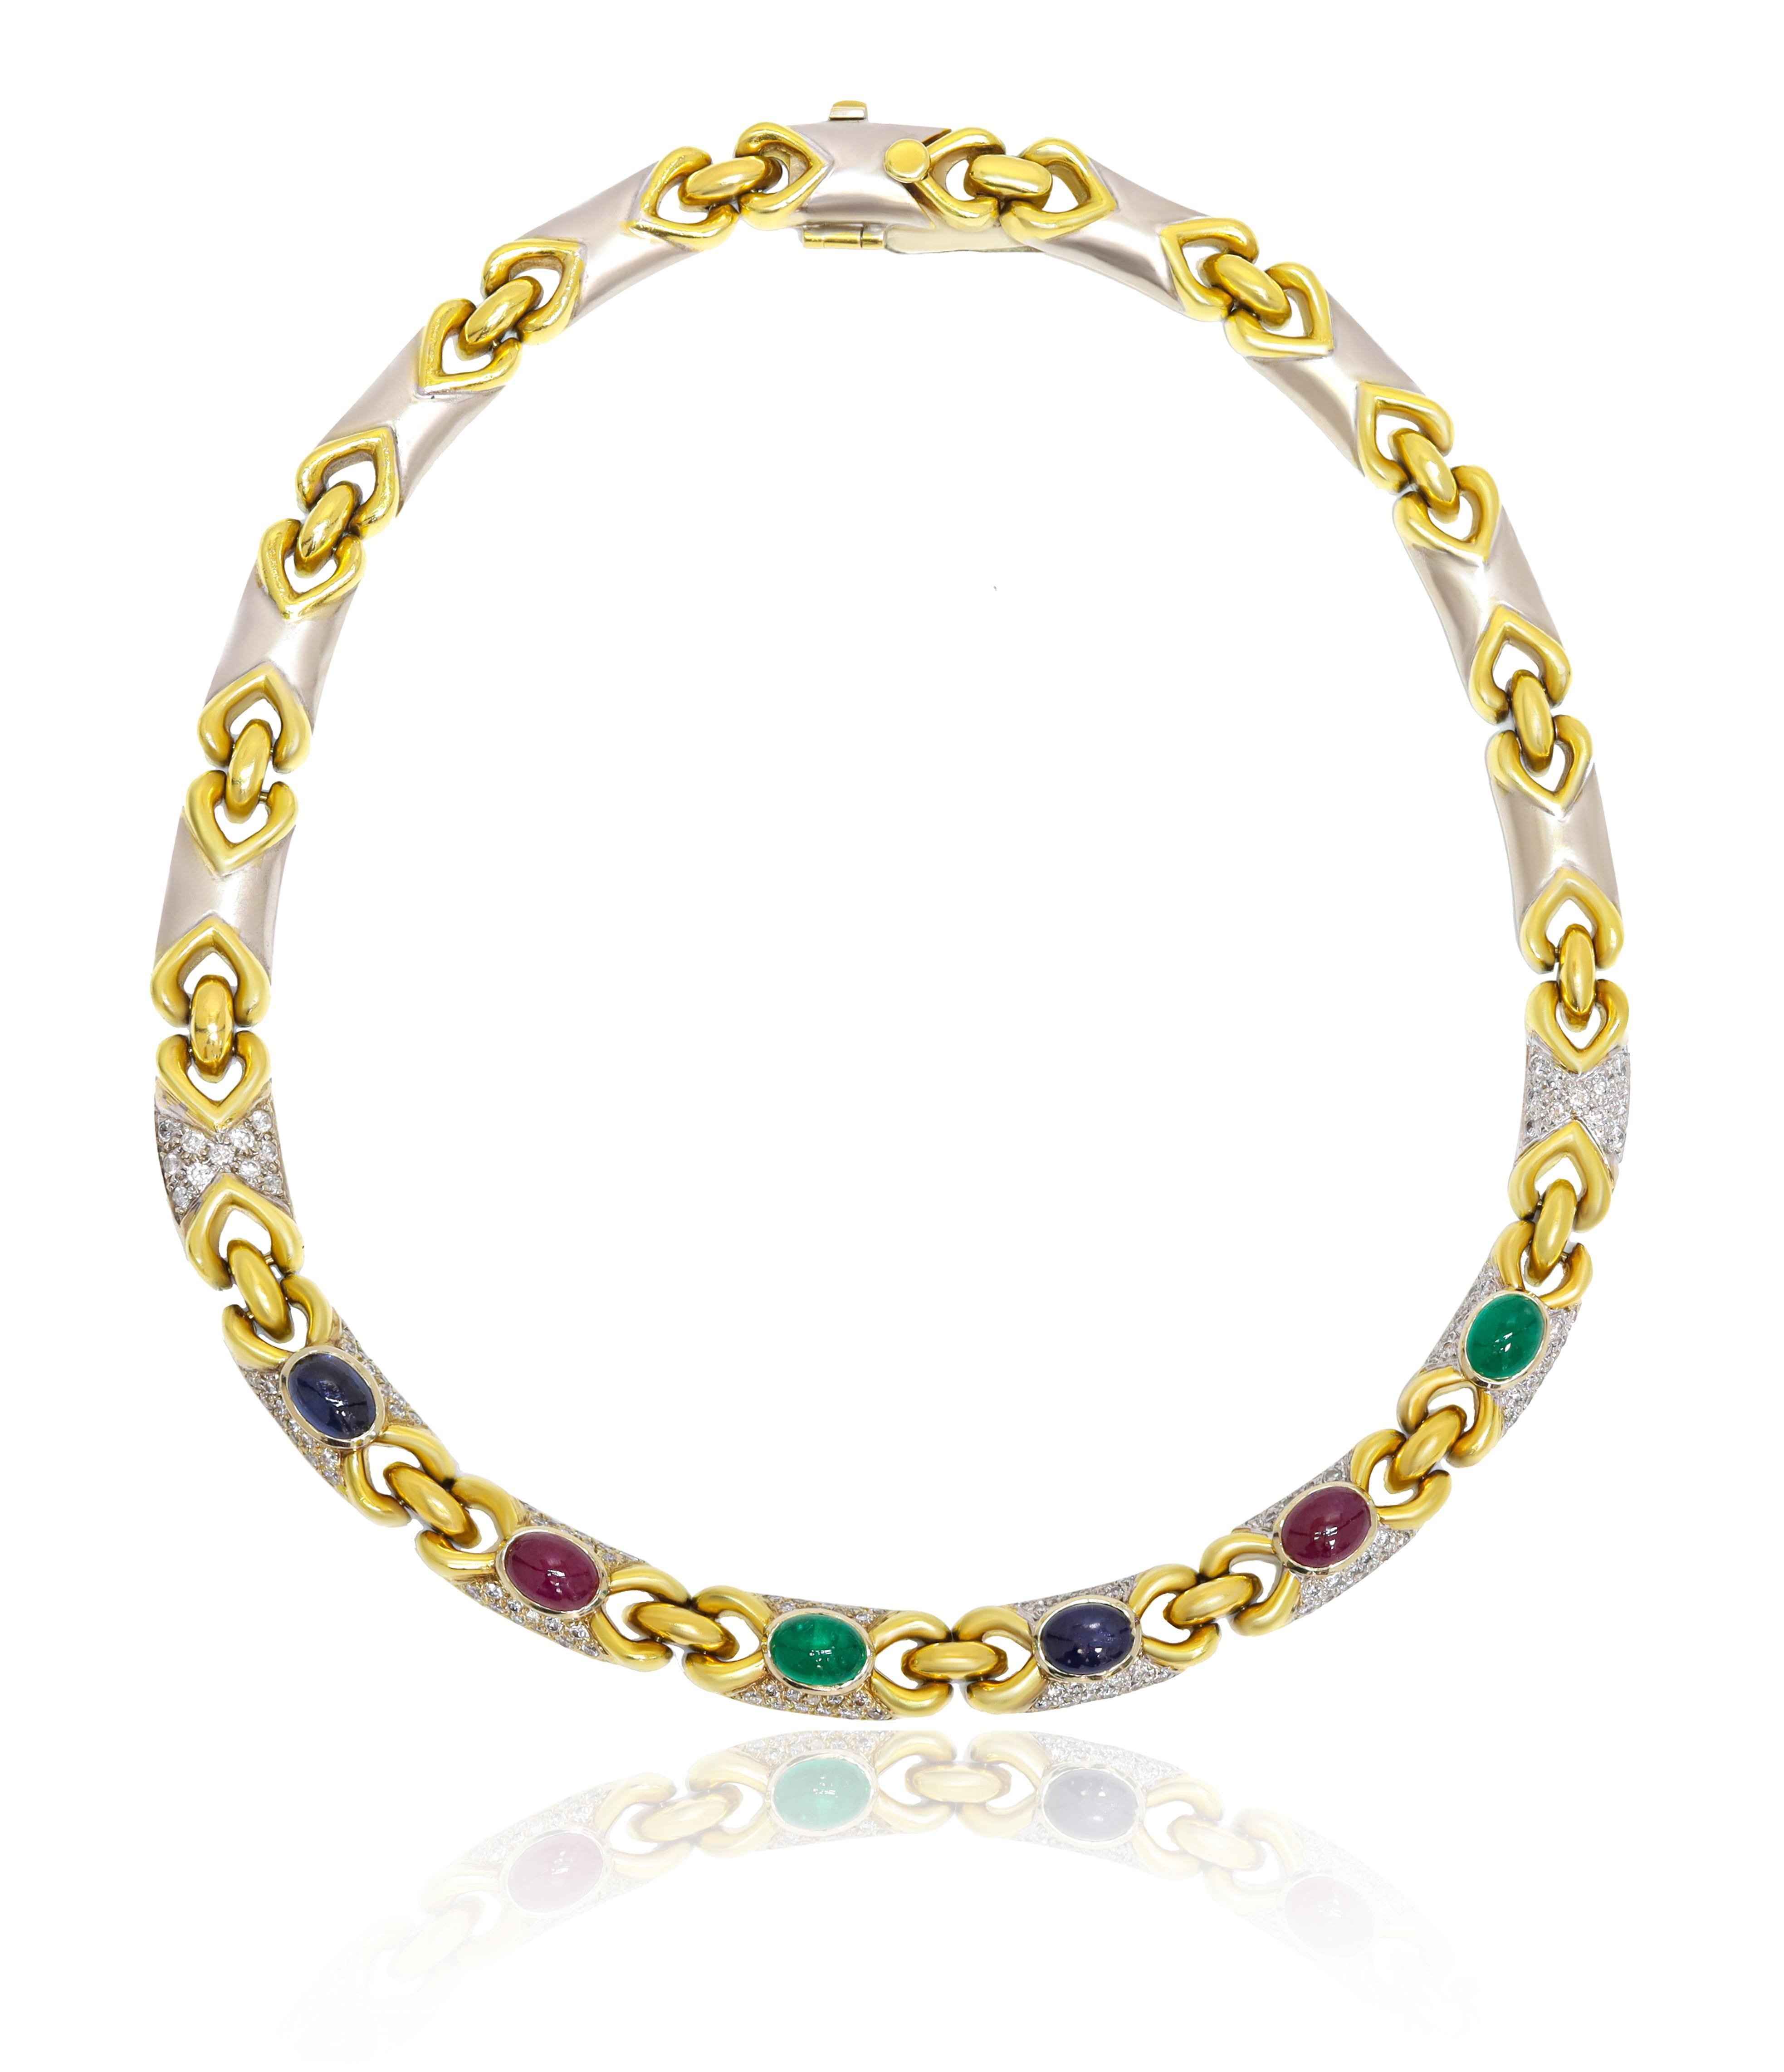 18kt two tone multi-stone necklace featuring 11.00 cts of pave round diamonds and 12.00 cts of cabochon emeralds, rubies, and sapphires 
Diana M. is a leading supplier of top-quality fine jewelry for over 35 years.
Diana M is one-stop shop for all